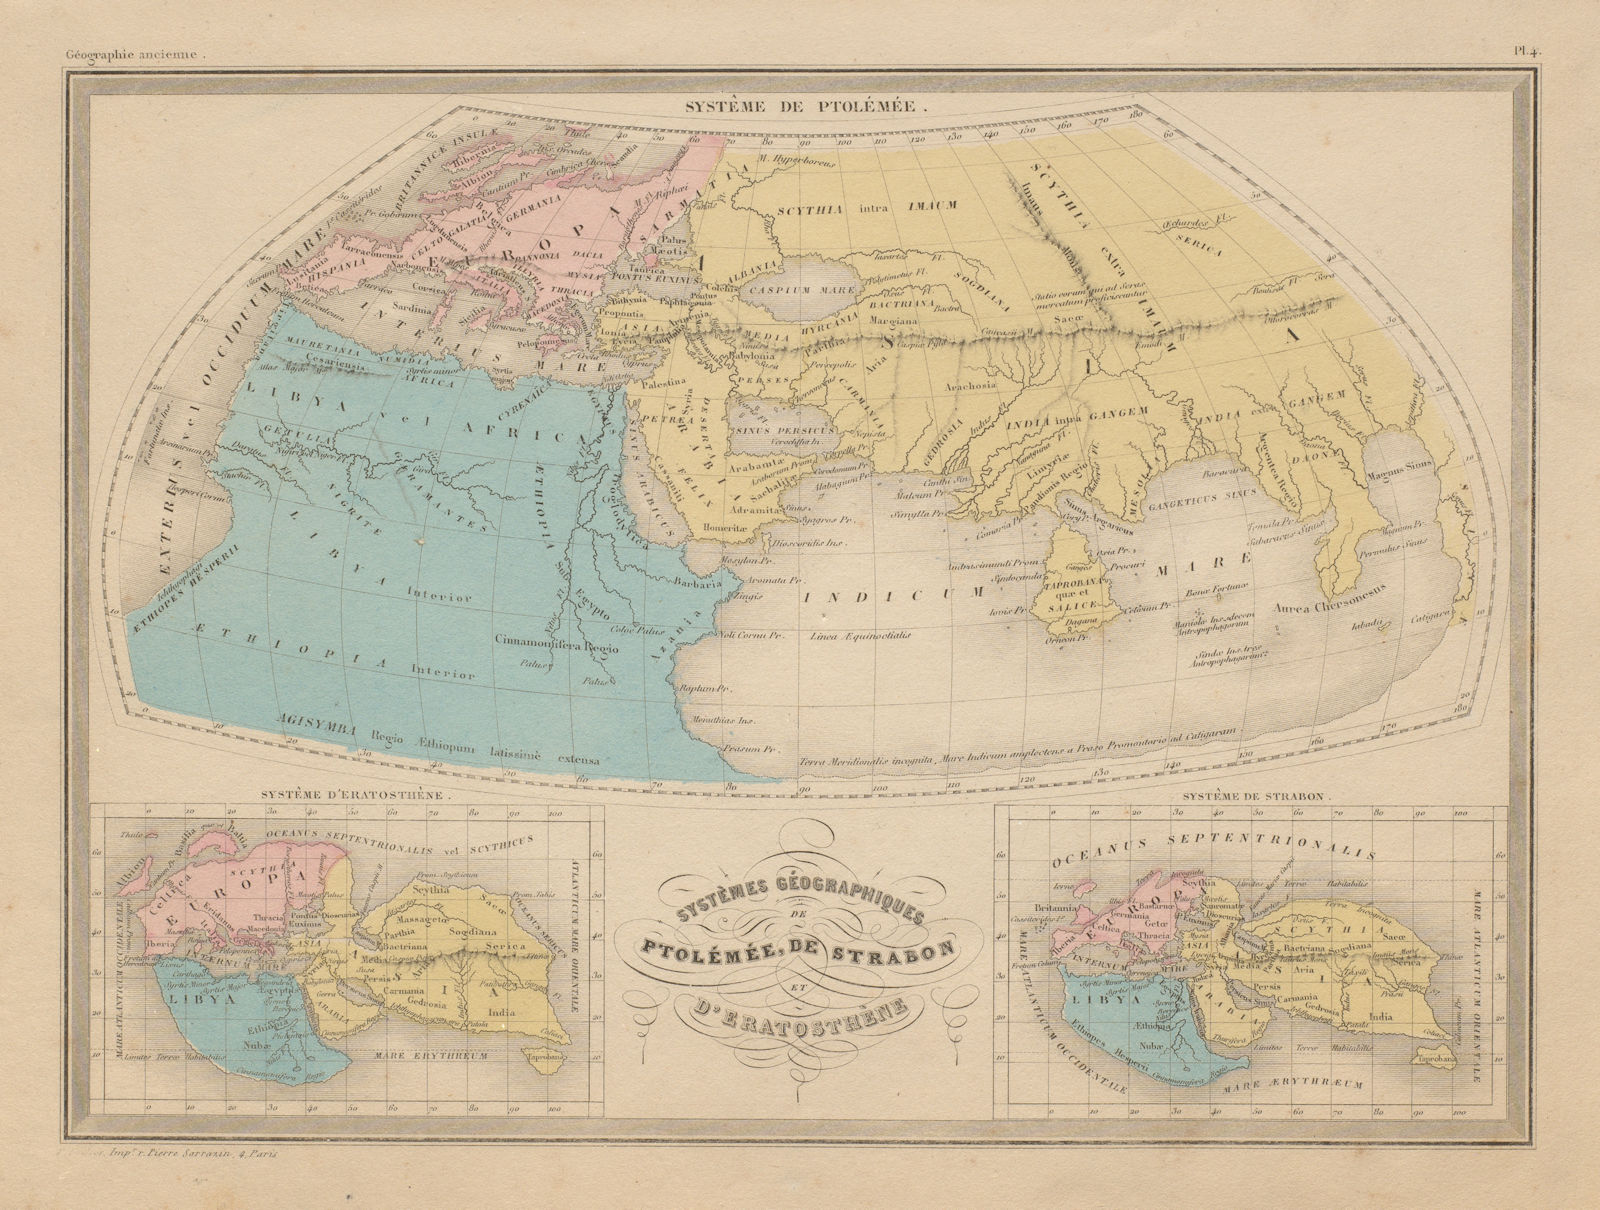 World according to Ptolemy, Strabo and Eratosthenes. MALTE-BRUN c1871 old map